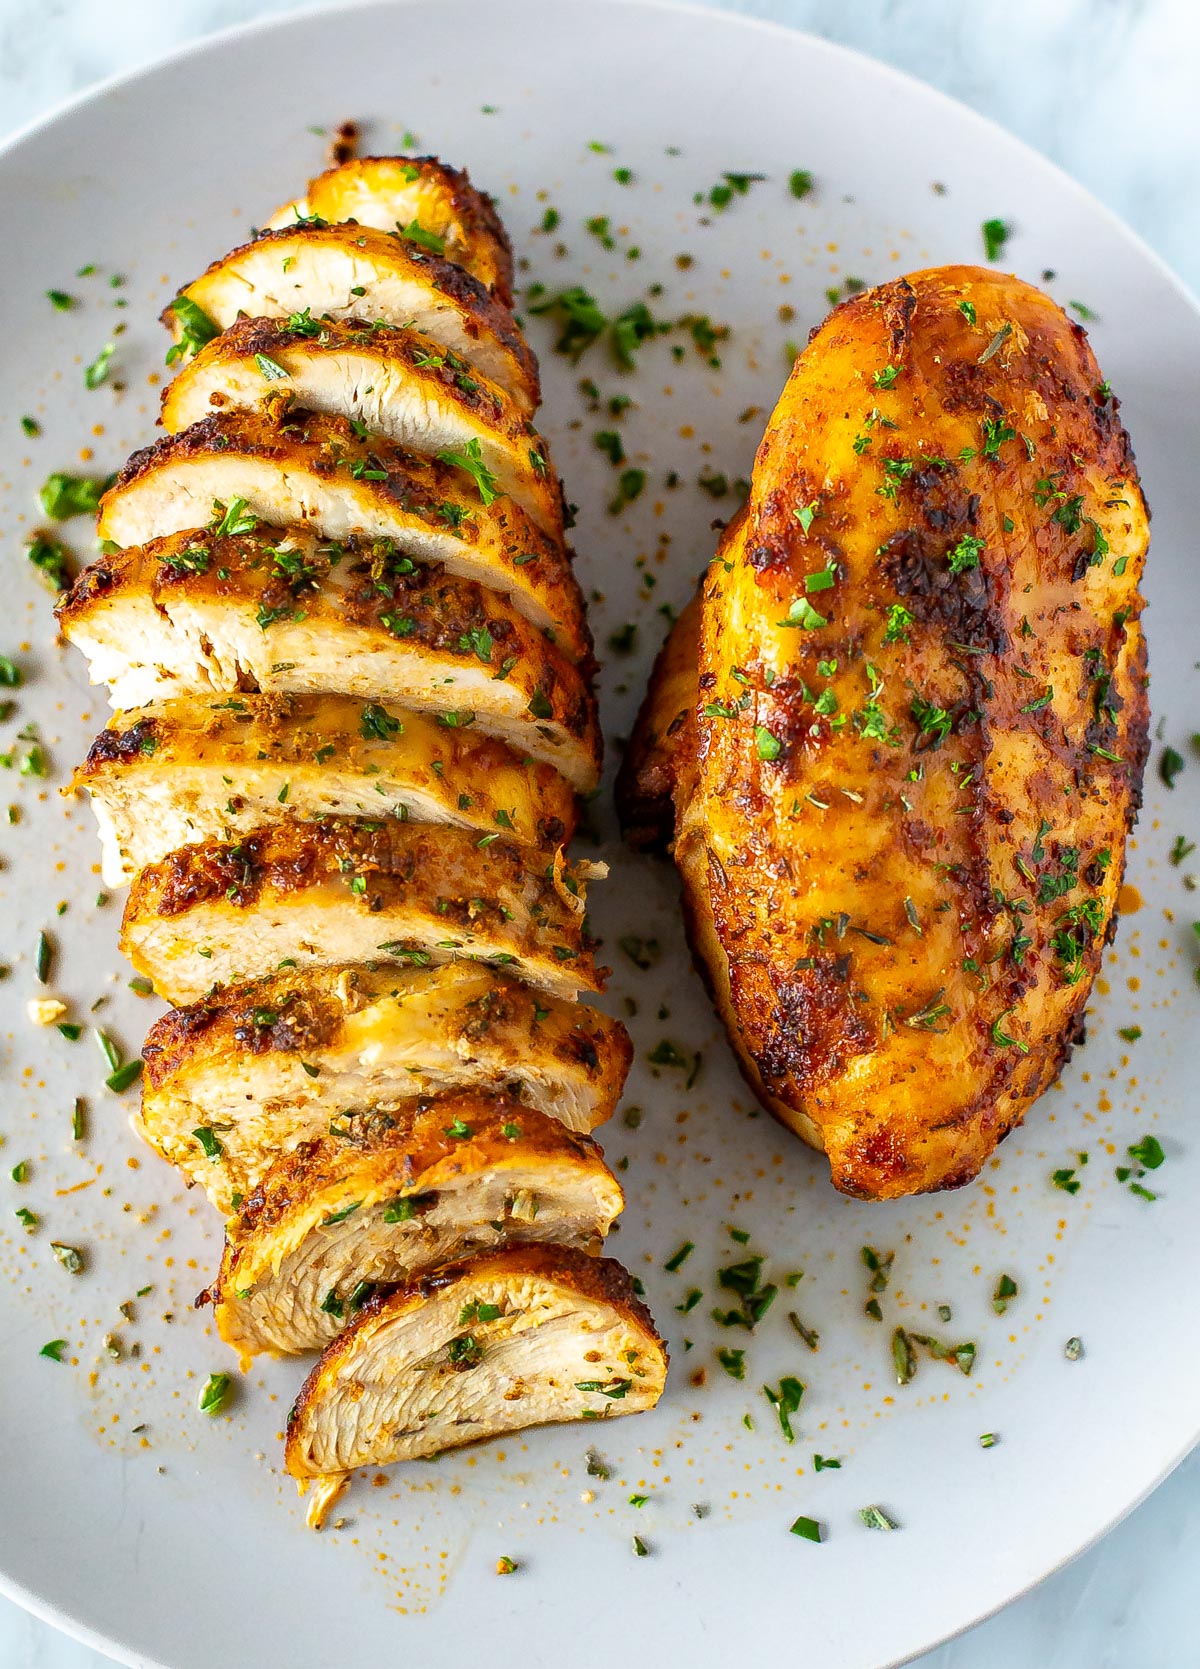 A close-up of a plate with one whole air fryer chicken breasts and another one that has been sliced.